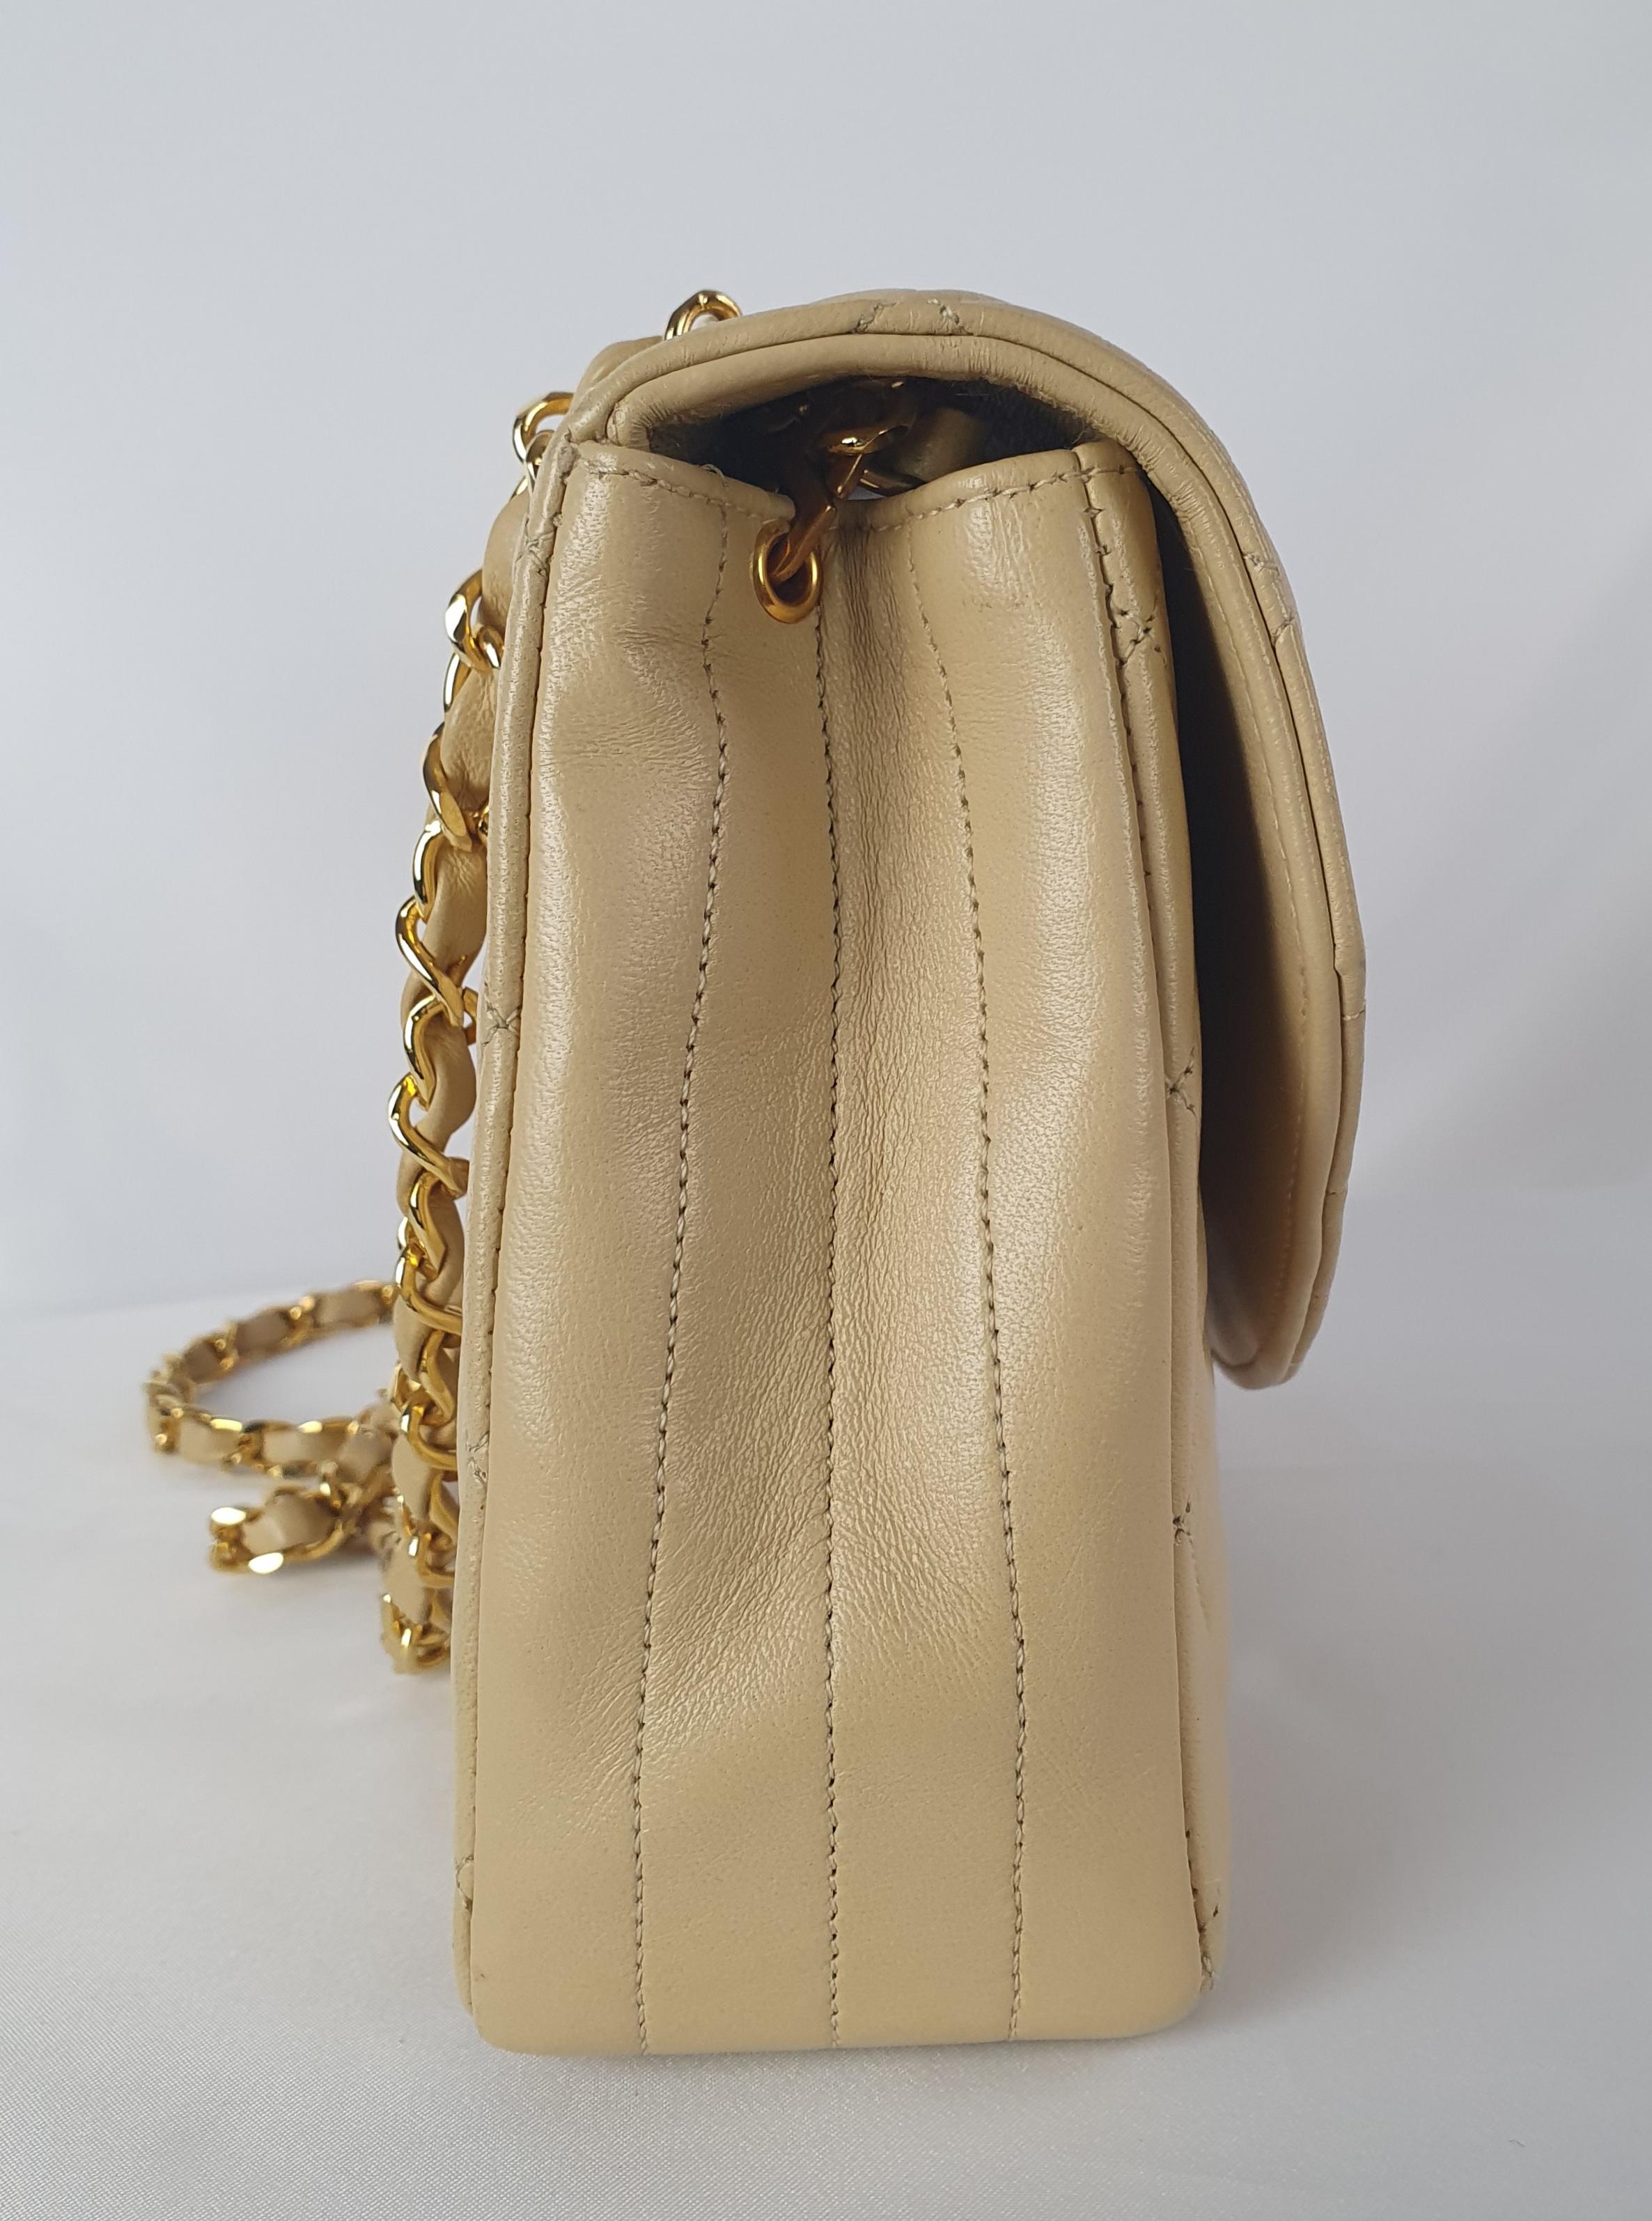 - Designer: CHANEL
- Model: Vintage
- Condition: Very good condition. Sign of wear on Leather
- Accessories: None
- Measurements: Width: 23cm , Height: 15cm , Depth: 7cm 
- Exterior Material: Leather
- Exterior Color: Beige
- Interior Material: